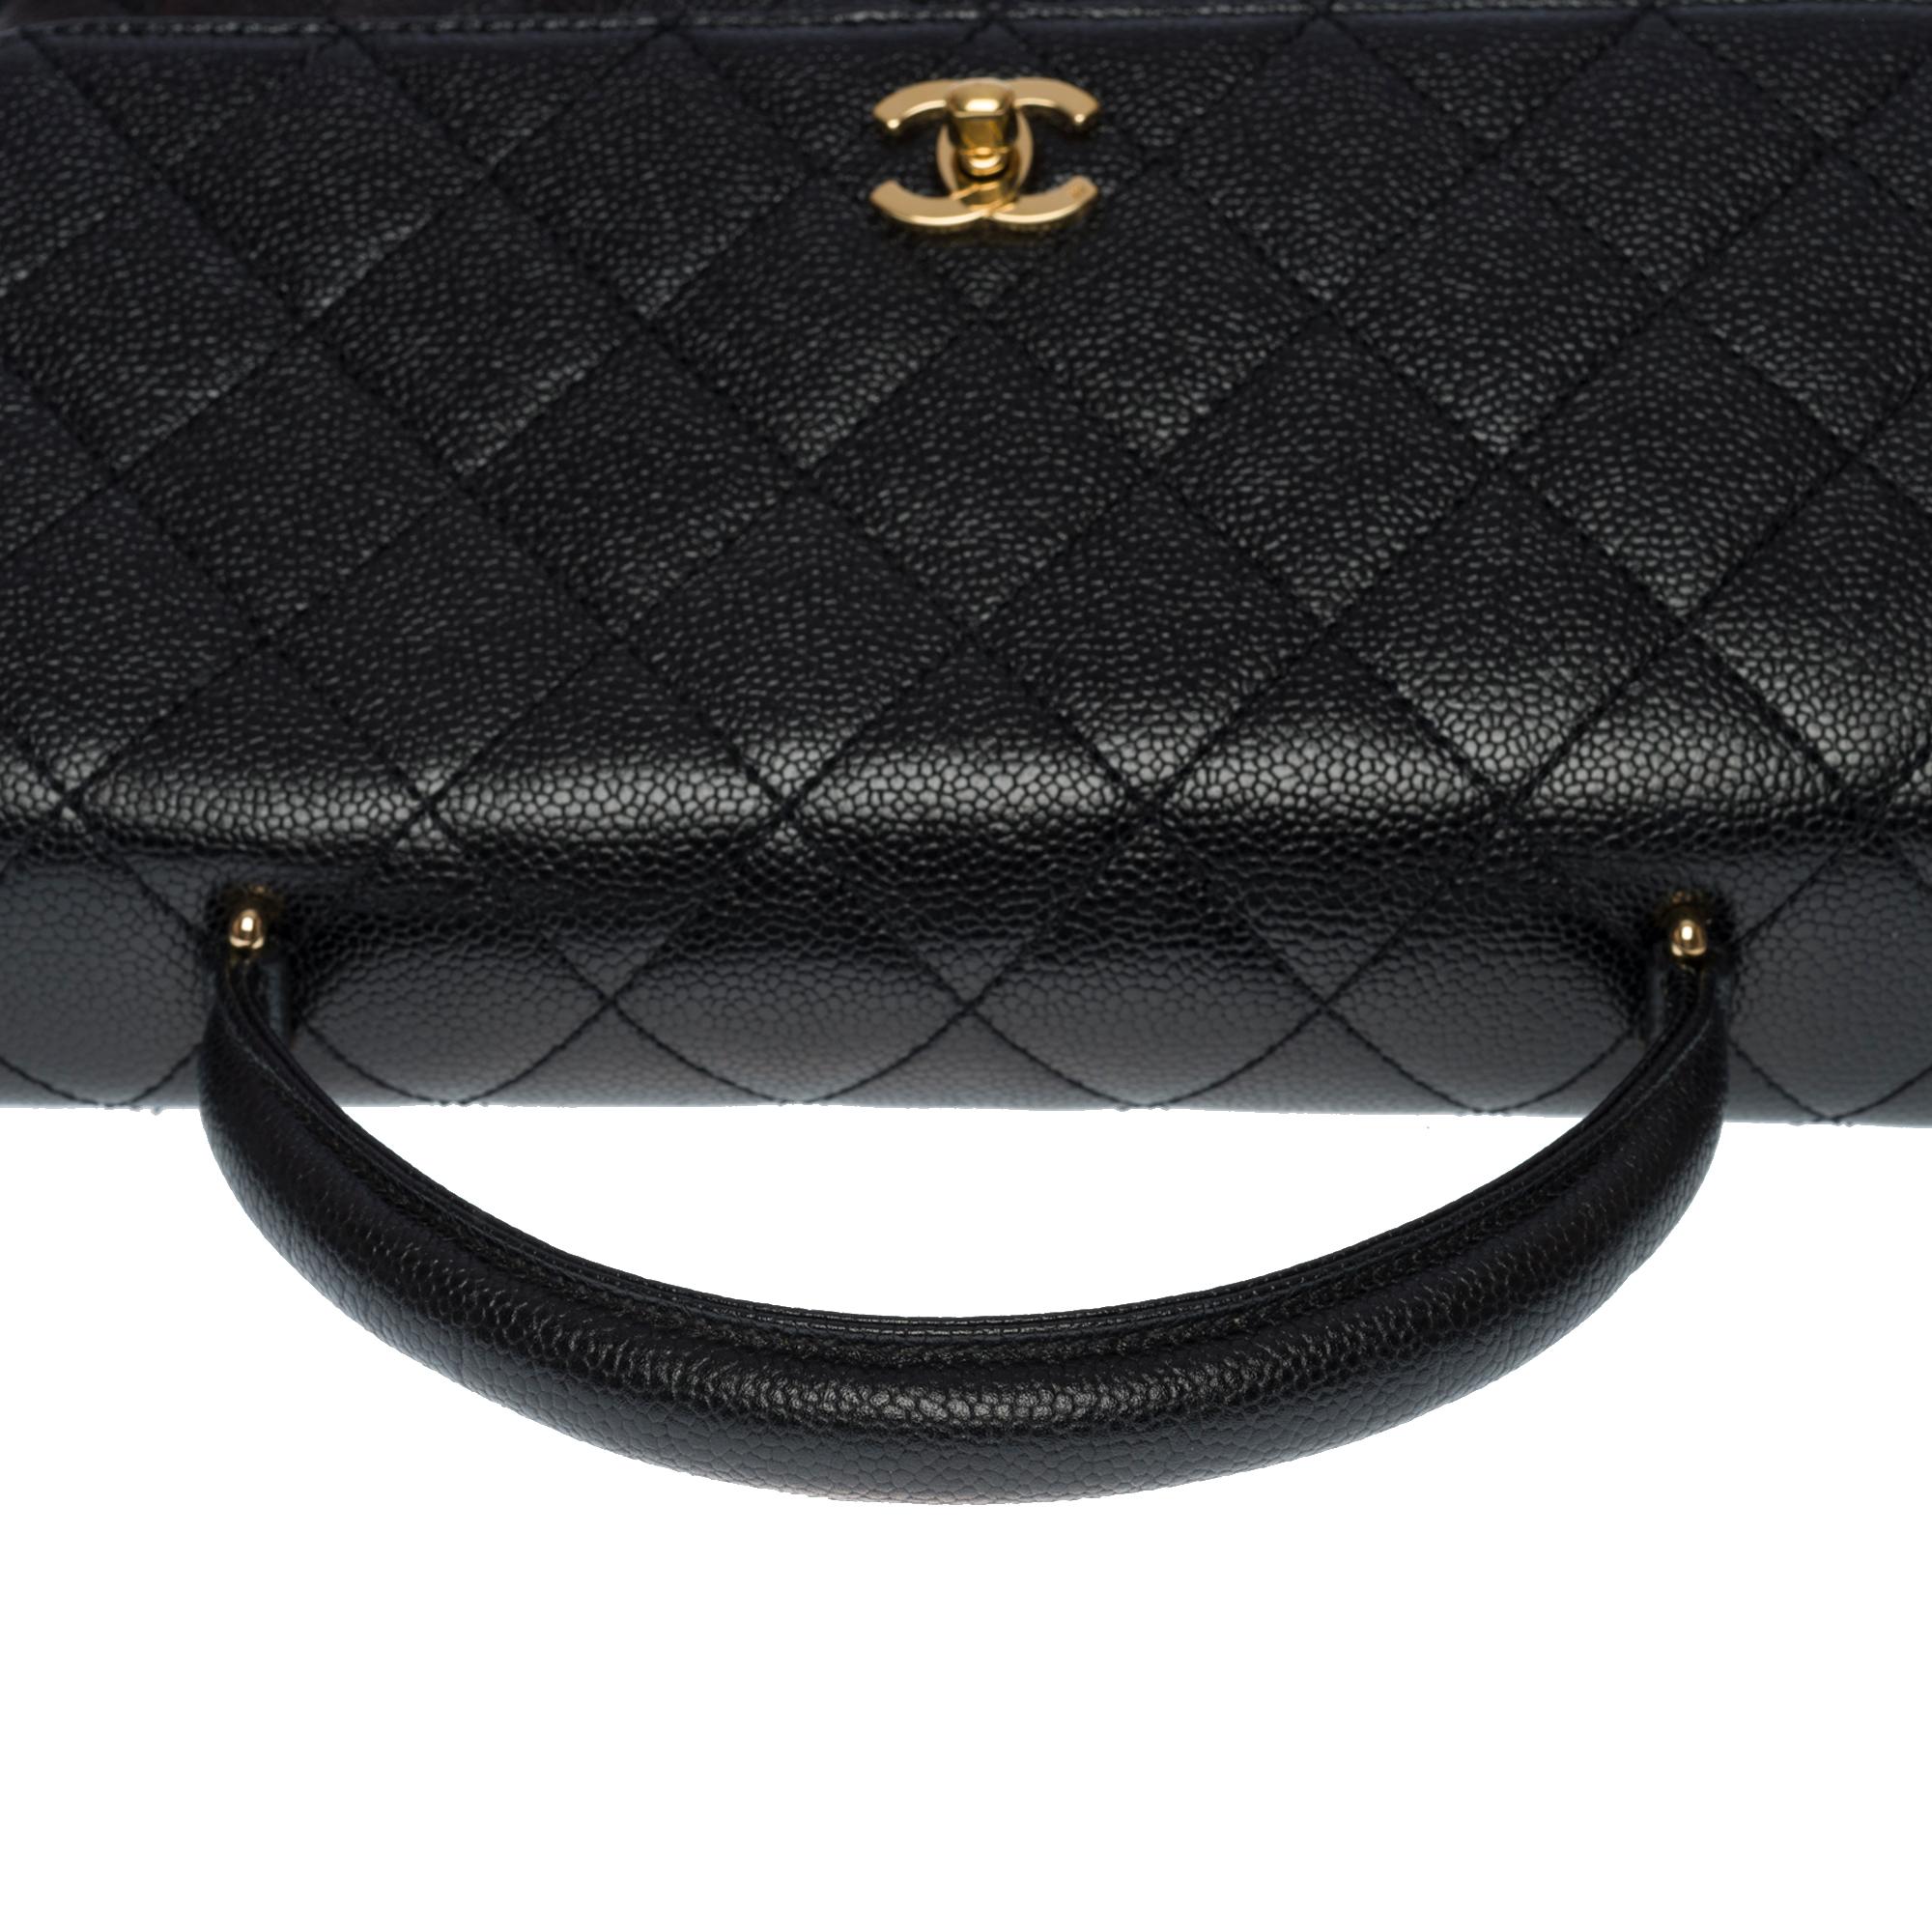 Women's Amazing Chanel Coco handle handbag in black caviar quilted leather, GHW